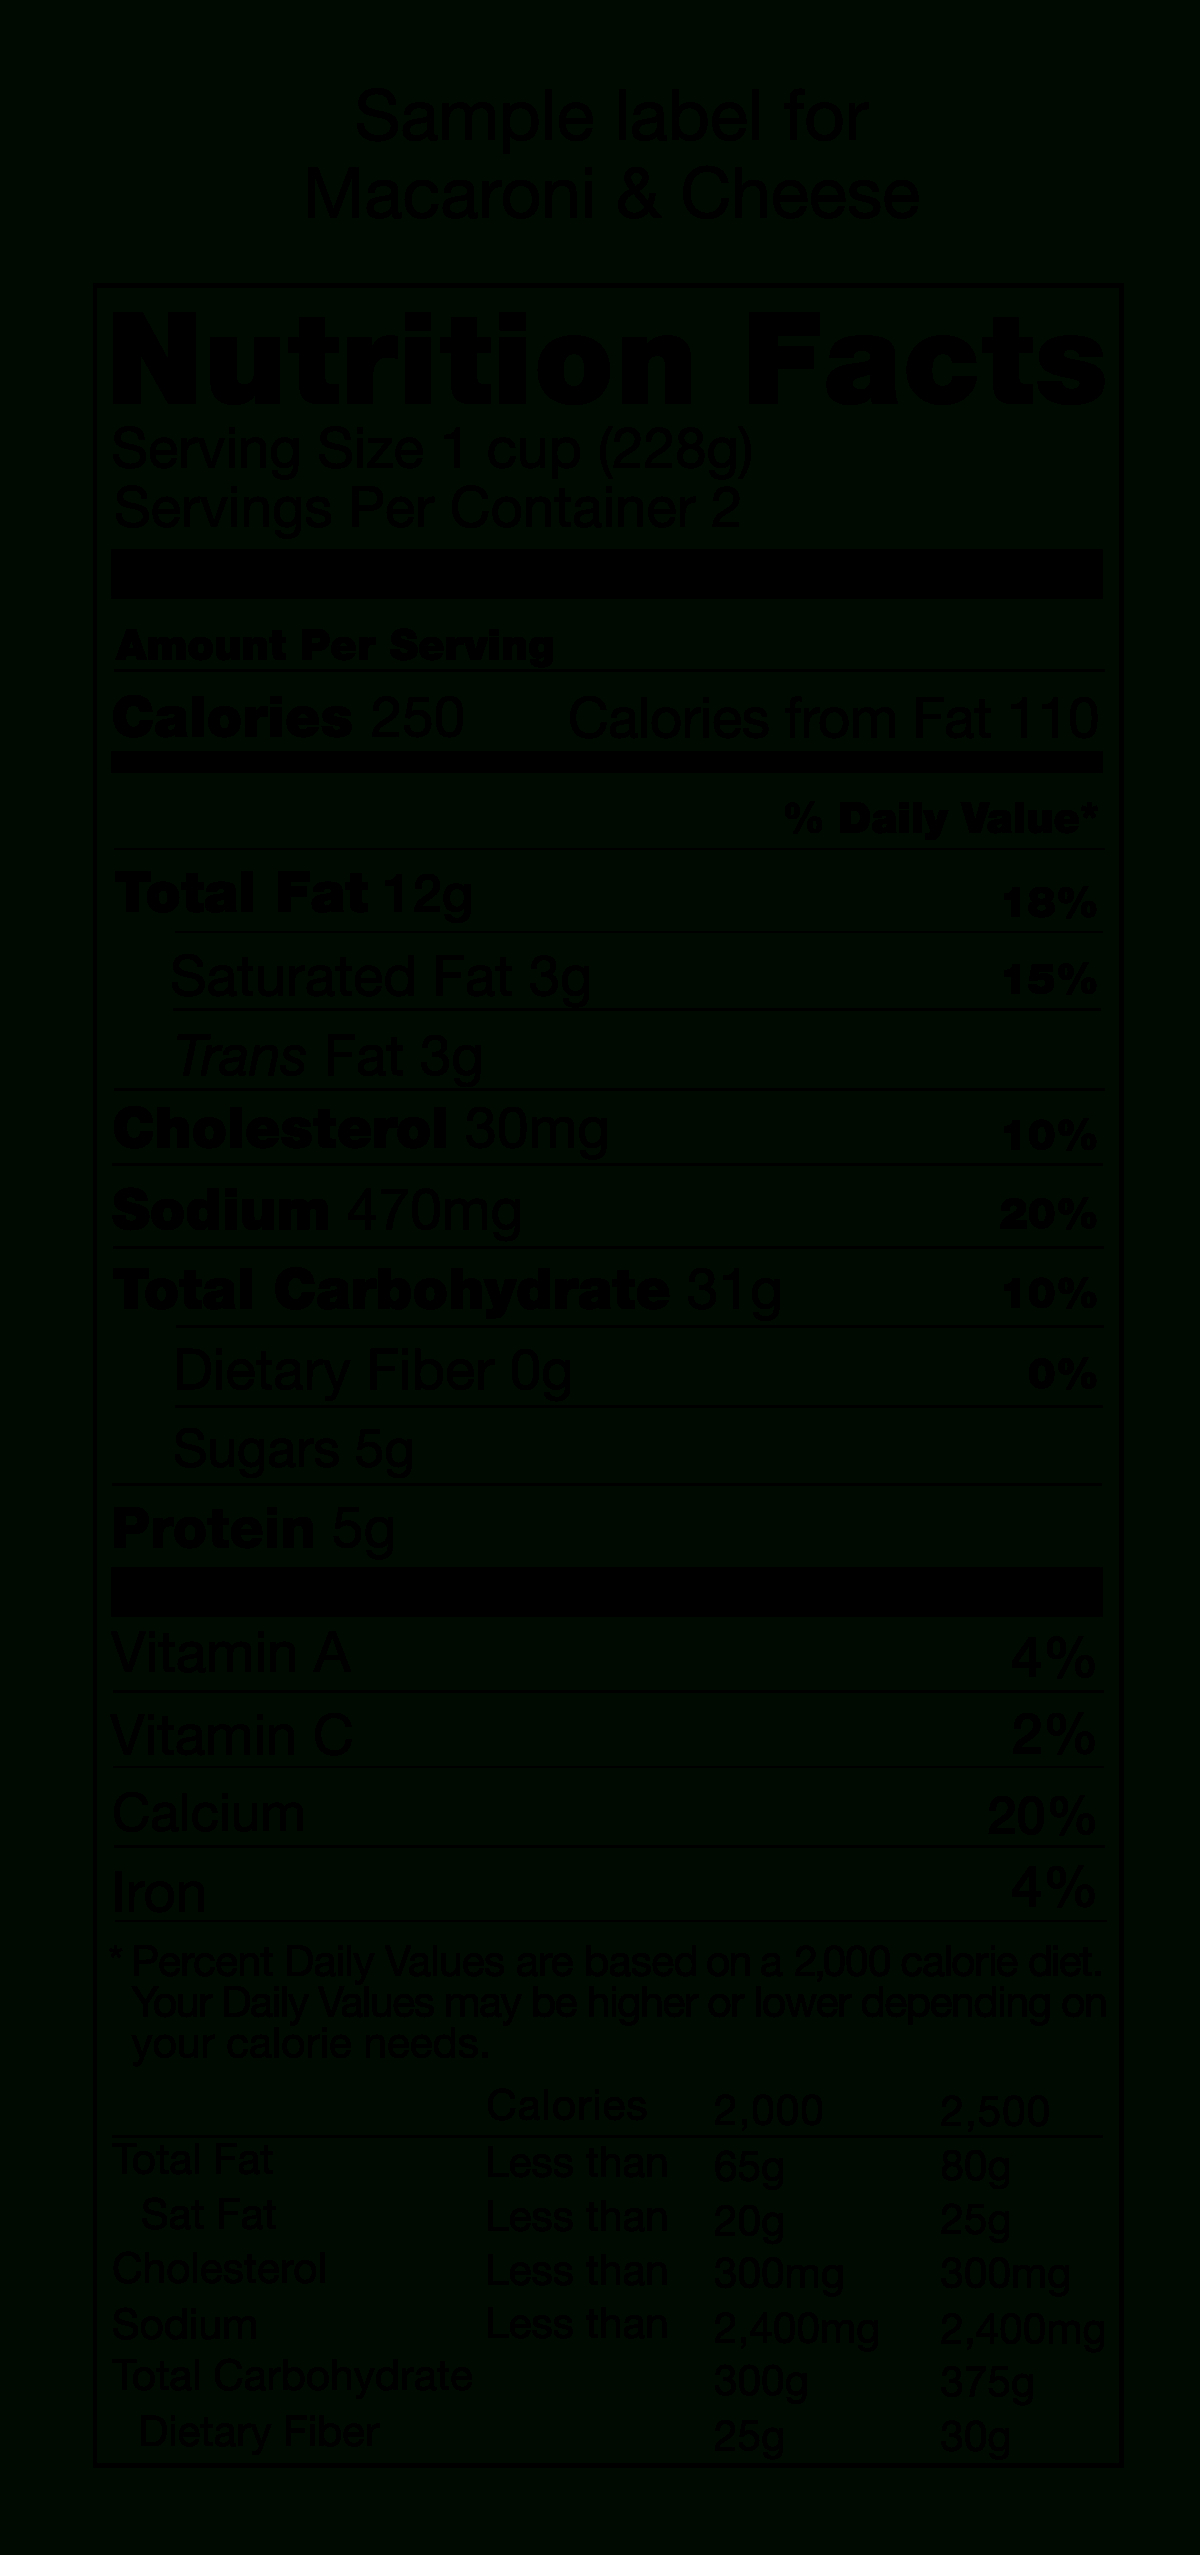 File:us Nutritional Fact Label.svg – Wikimedia Commons With Ingredient Label Template